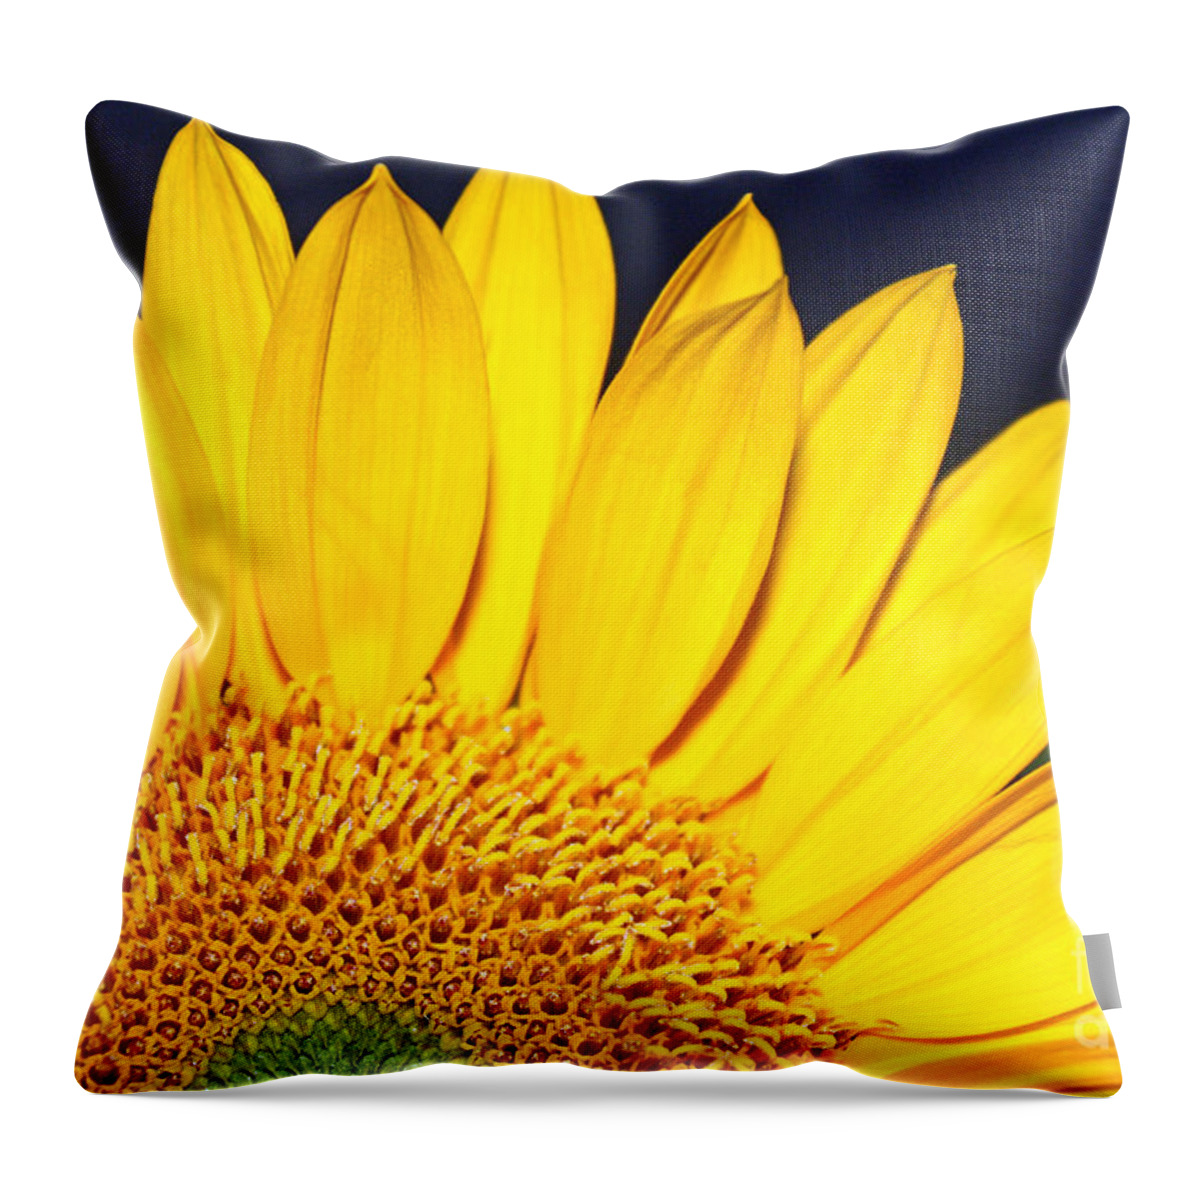 Flower Throw Pillow featuring the photograph Morning Sunshine by Kelly Holm